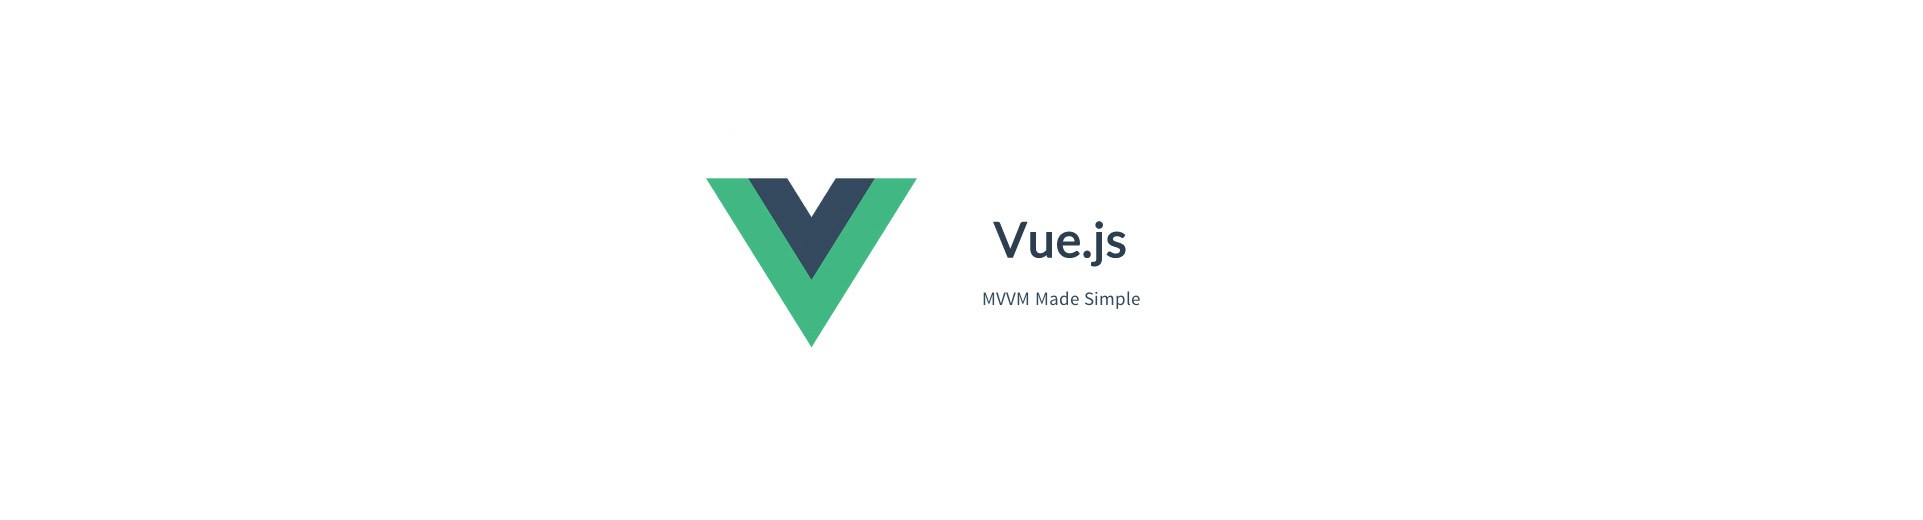 Up & Running with Vue.js 2.0 by creating a simple blog application